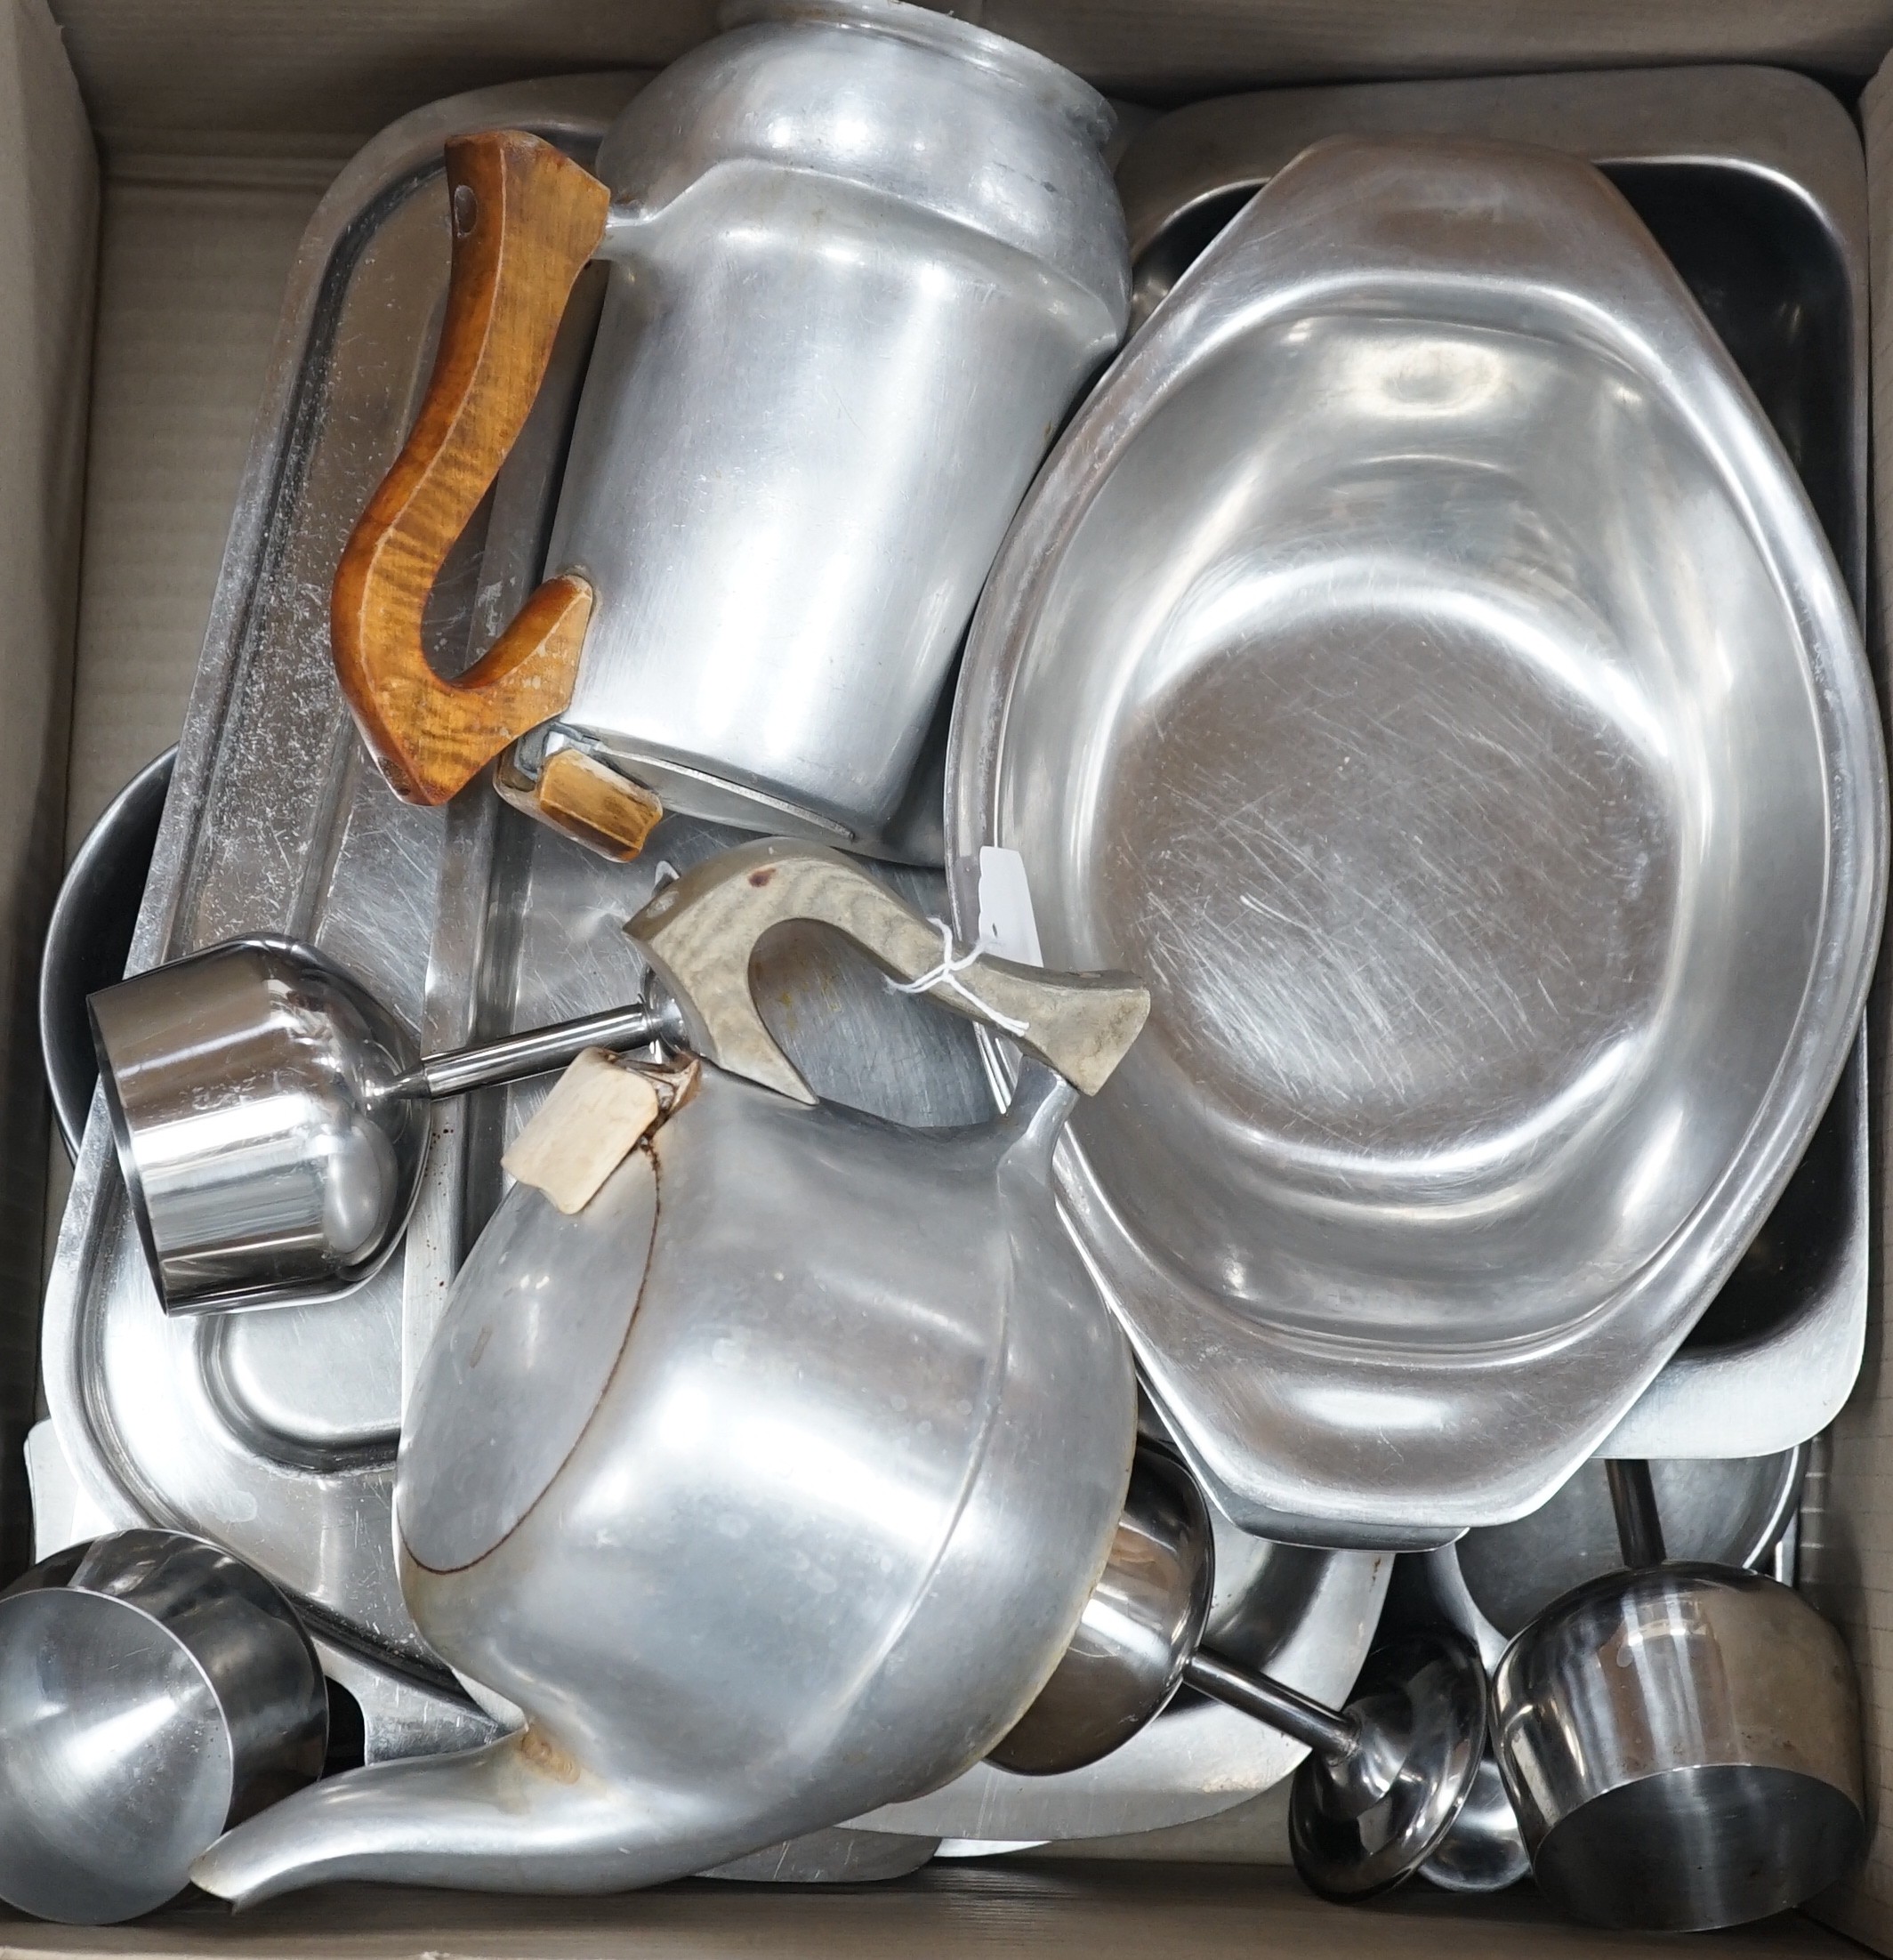 Various 1960's stainless steel wares including Danish and Piqcot ware